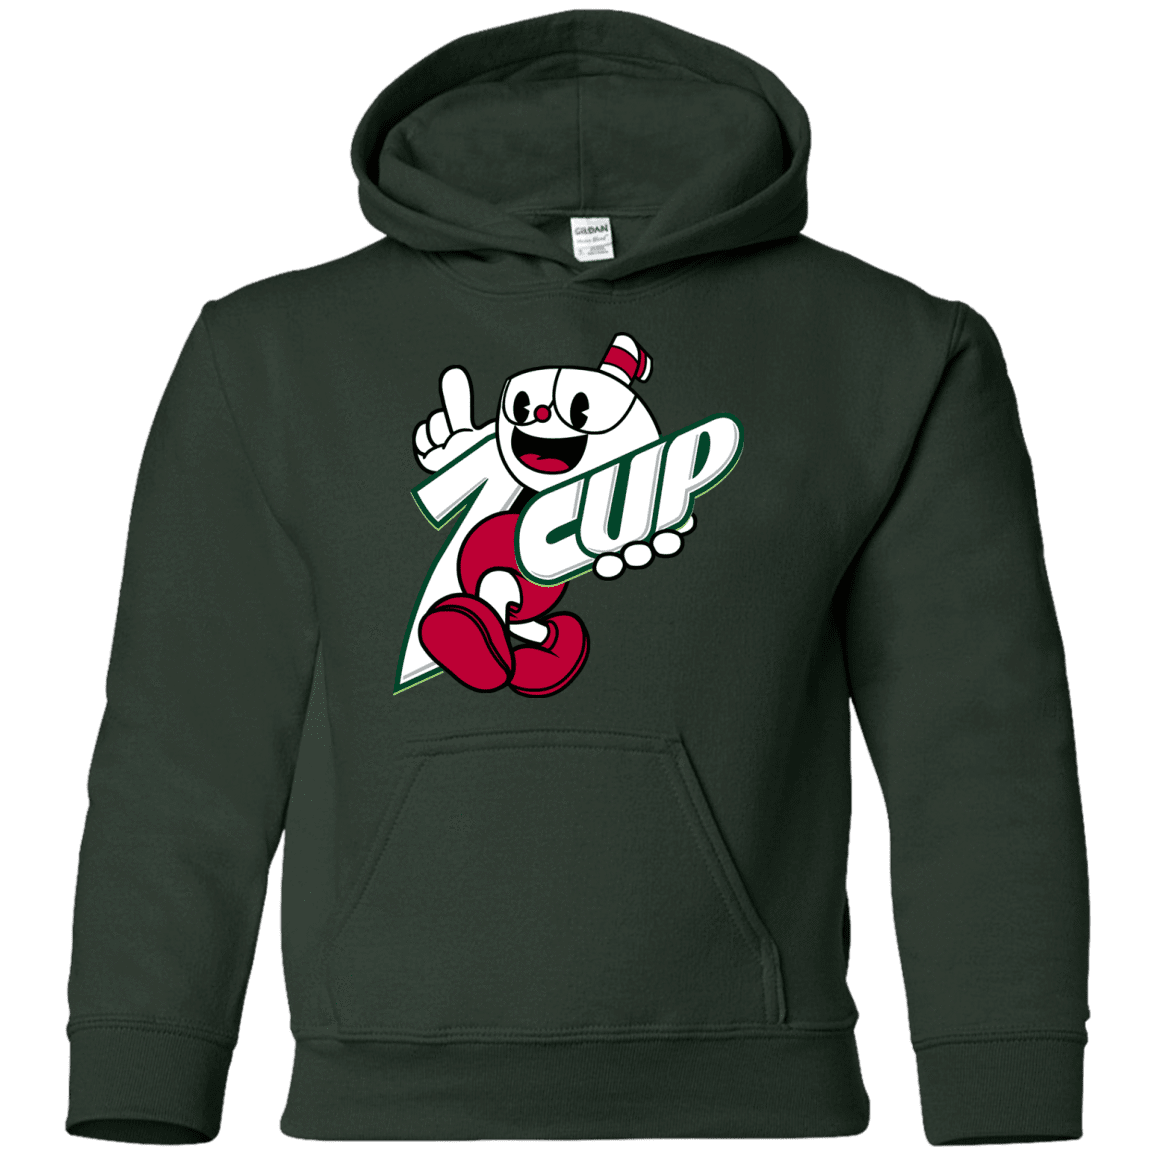 Sweatshirts Forest Green / YS 1cup Youth Hoodie